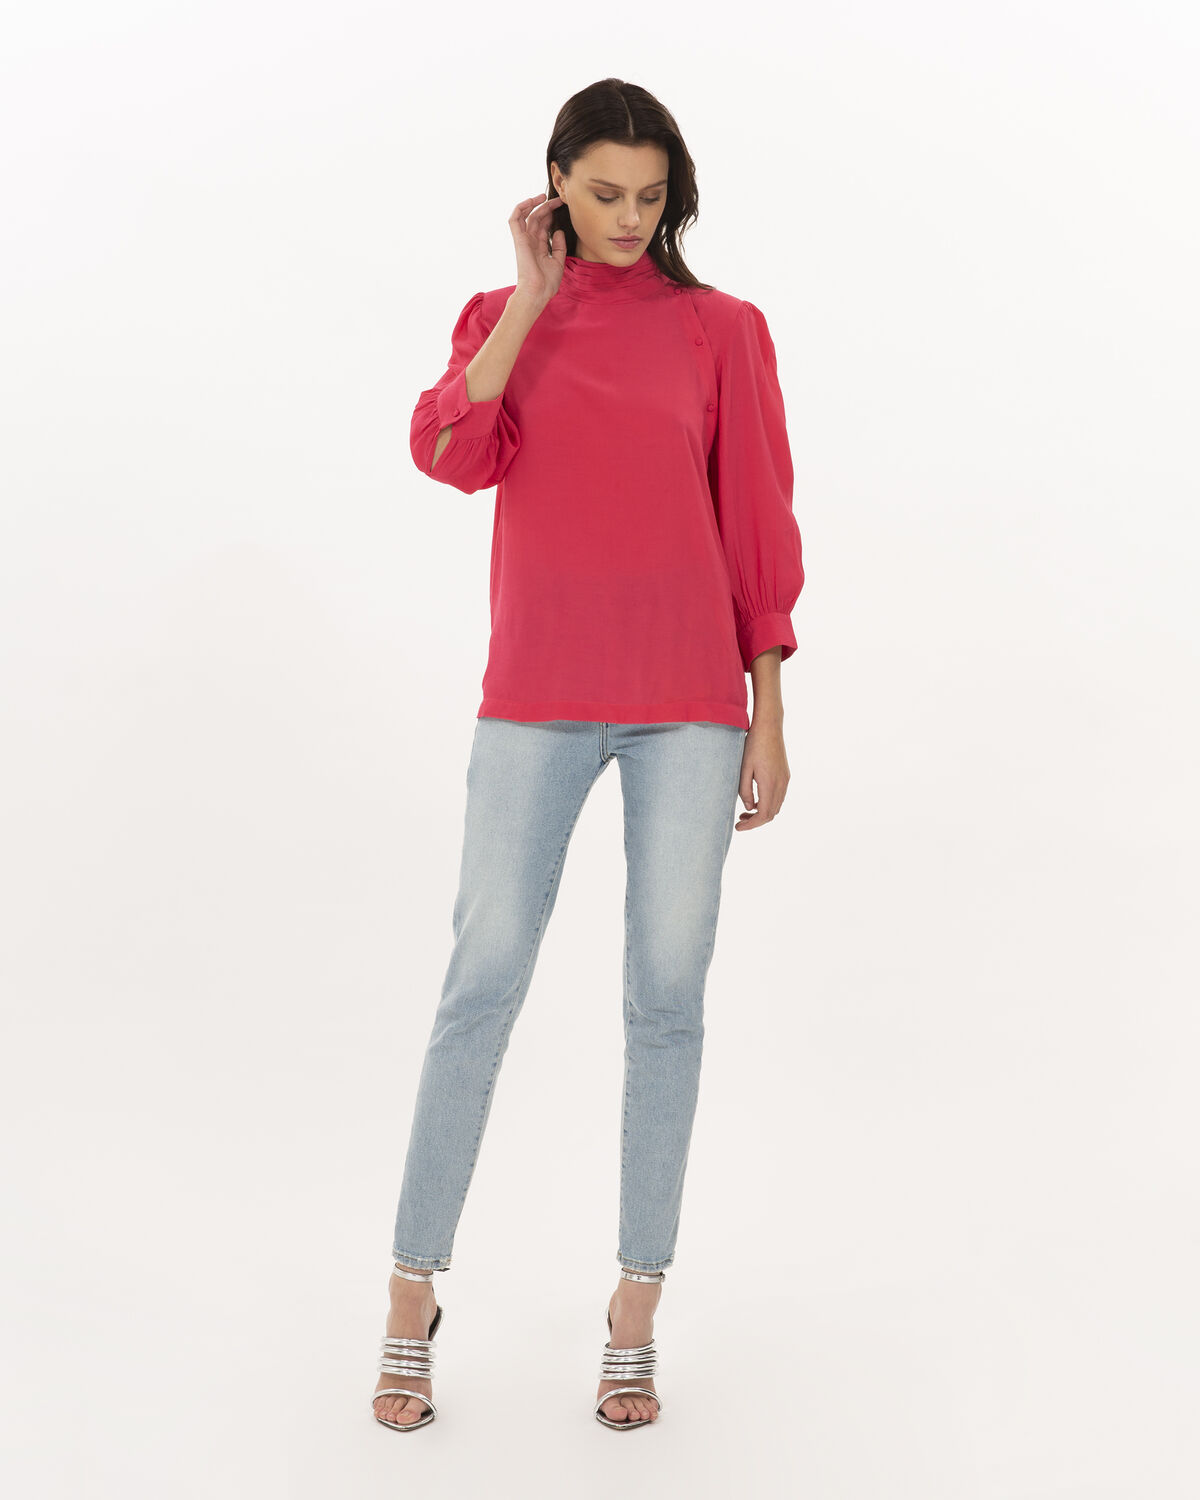 Photo of IRO Paris Sense Top Fushia - This Top Is Distinguished By Its Pleated Collar, Marked Shoulders And Buttons On The Front. With Its Sparkling Colour, Wear It With Light Raw Jeans For A Sunny Look. Spring Summer 19